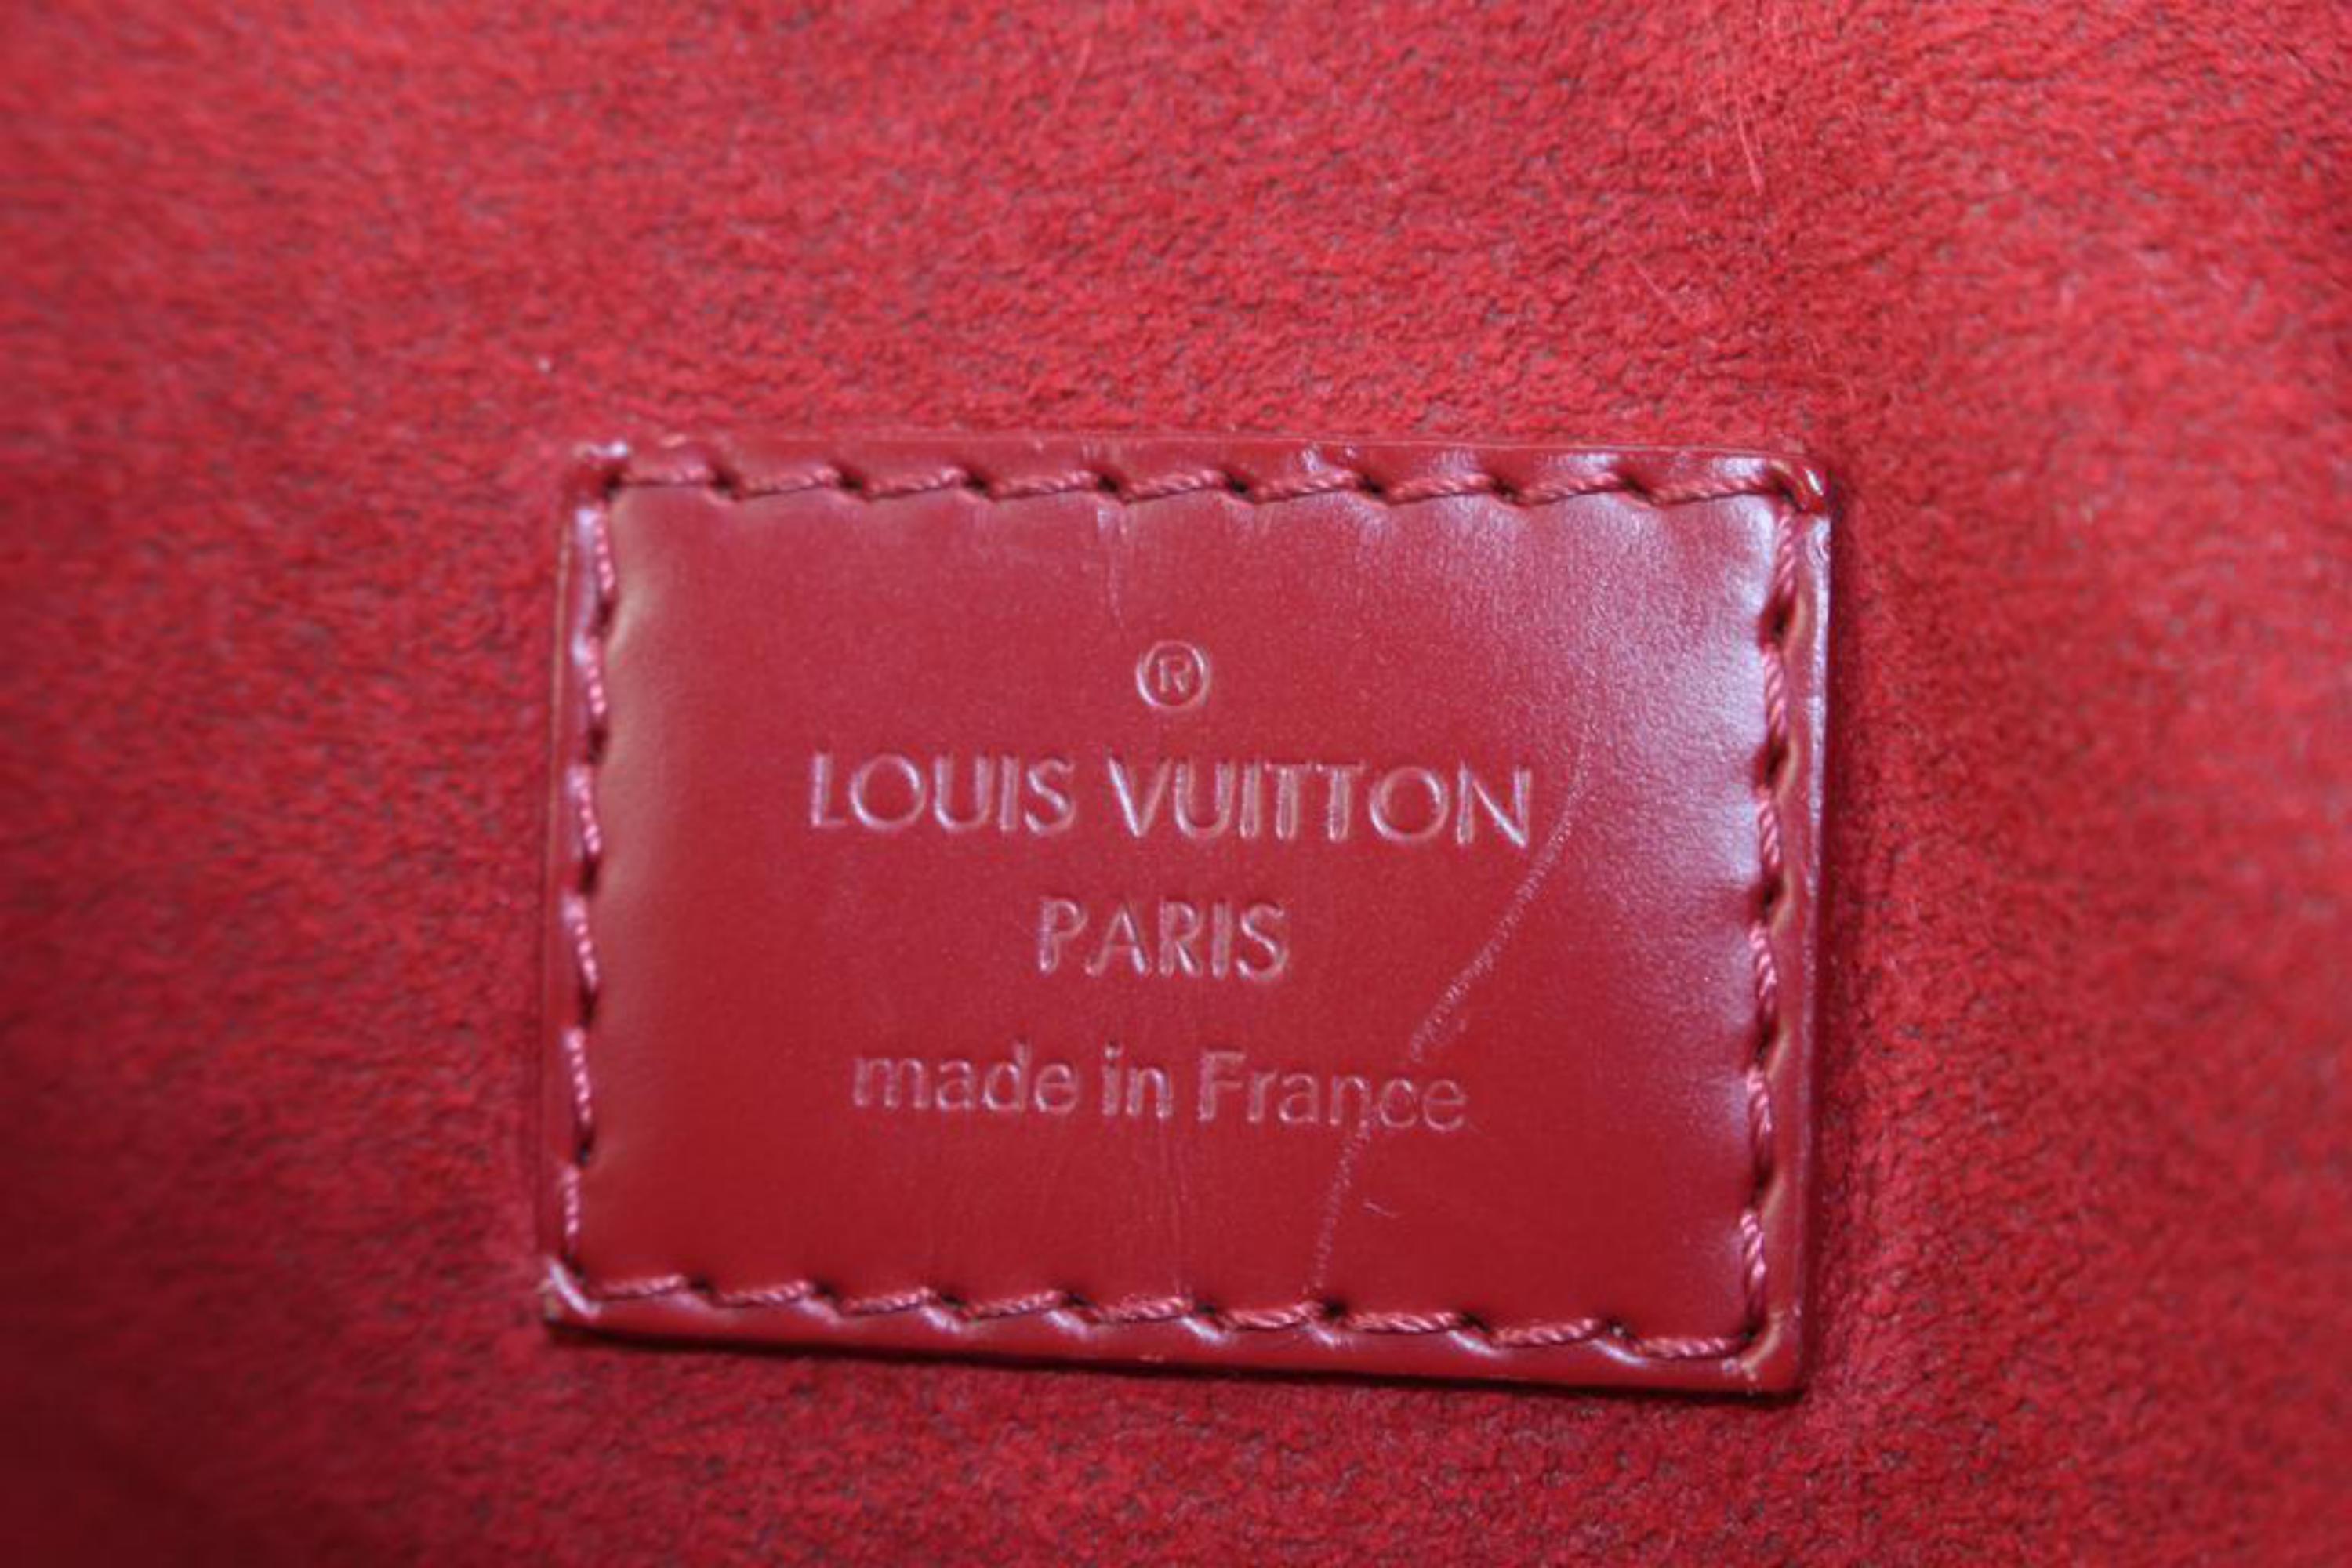 Louis Vuitton Red x Damier Ebene Caissa Hobo Bag 3L414
Date Code/Serial Number: SR3166
Made In: France
Measurements: Length:  14